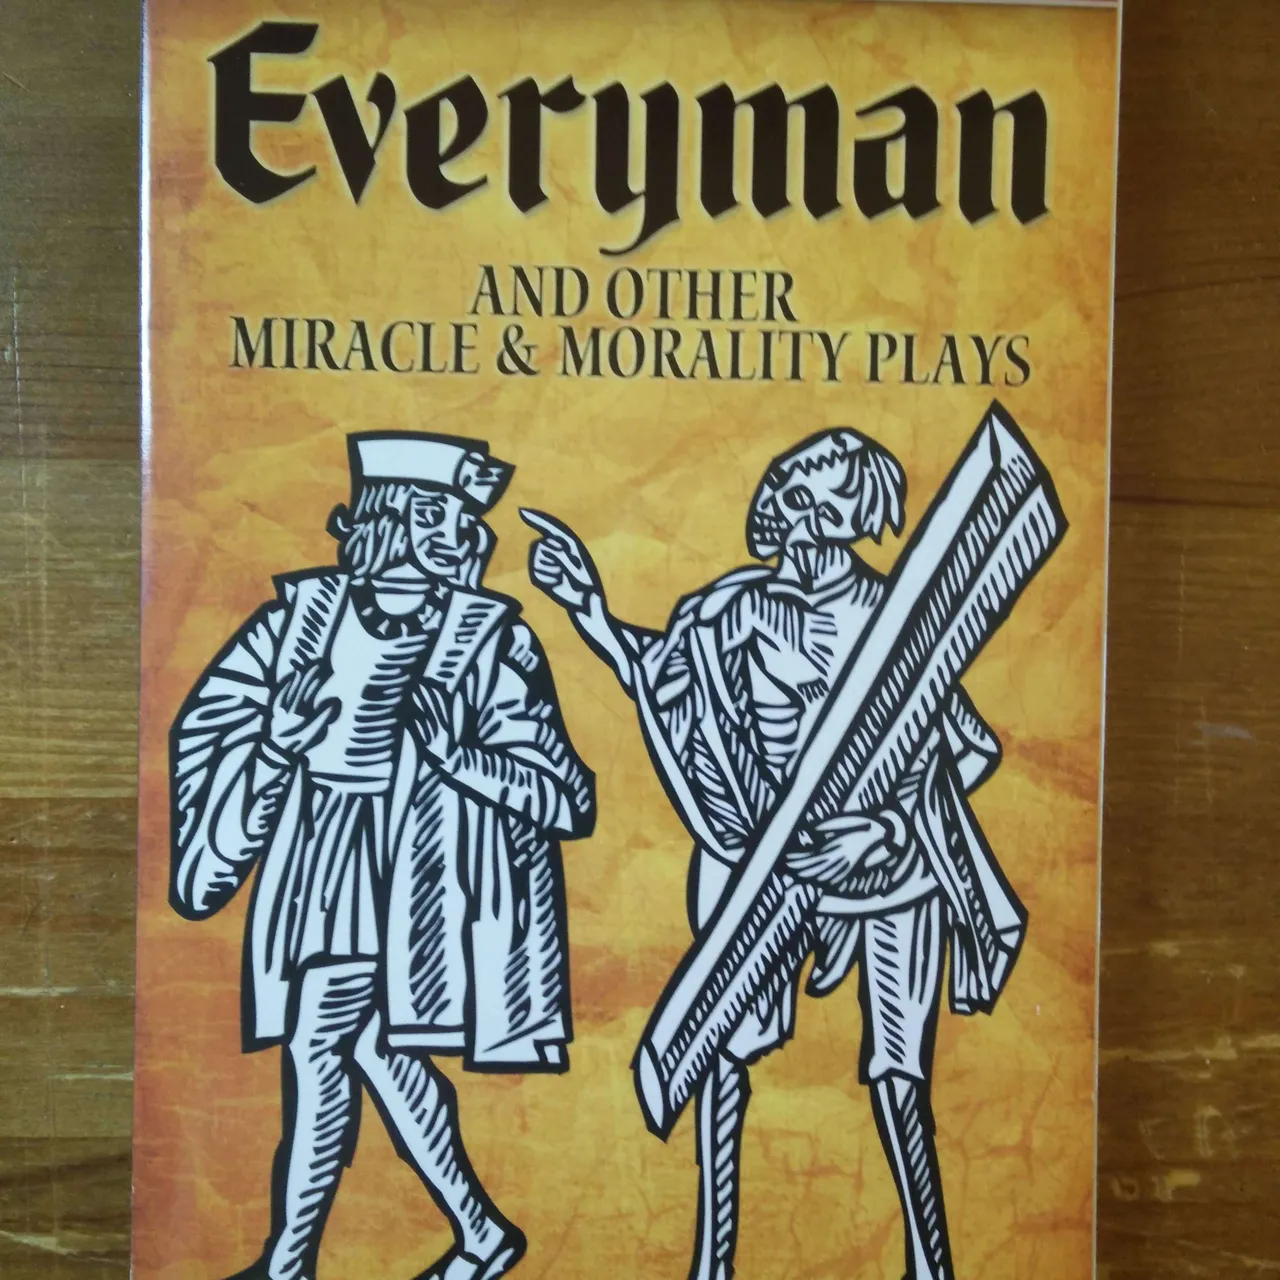 Everyman and Other Miracle & Morality Plays photo 1